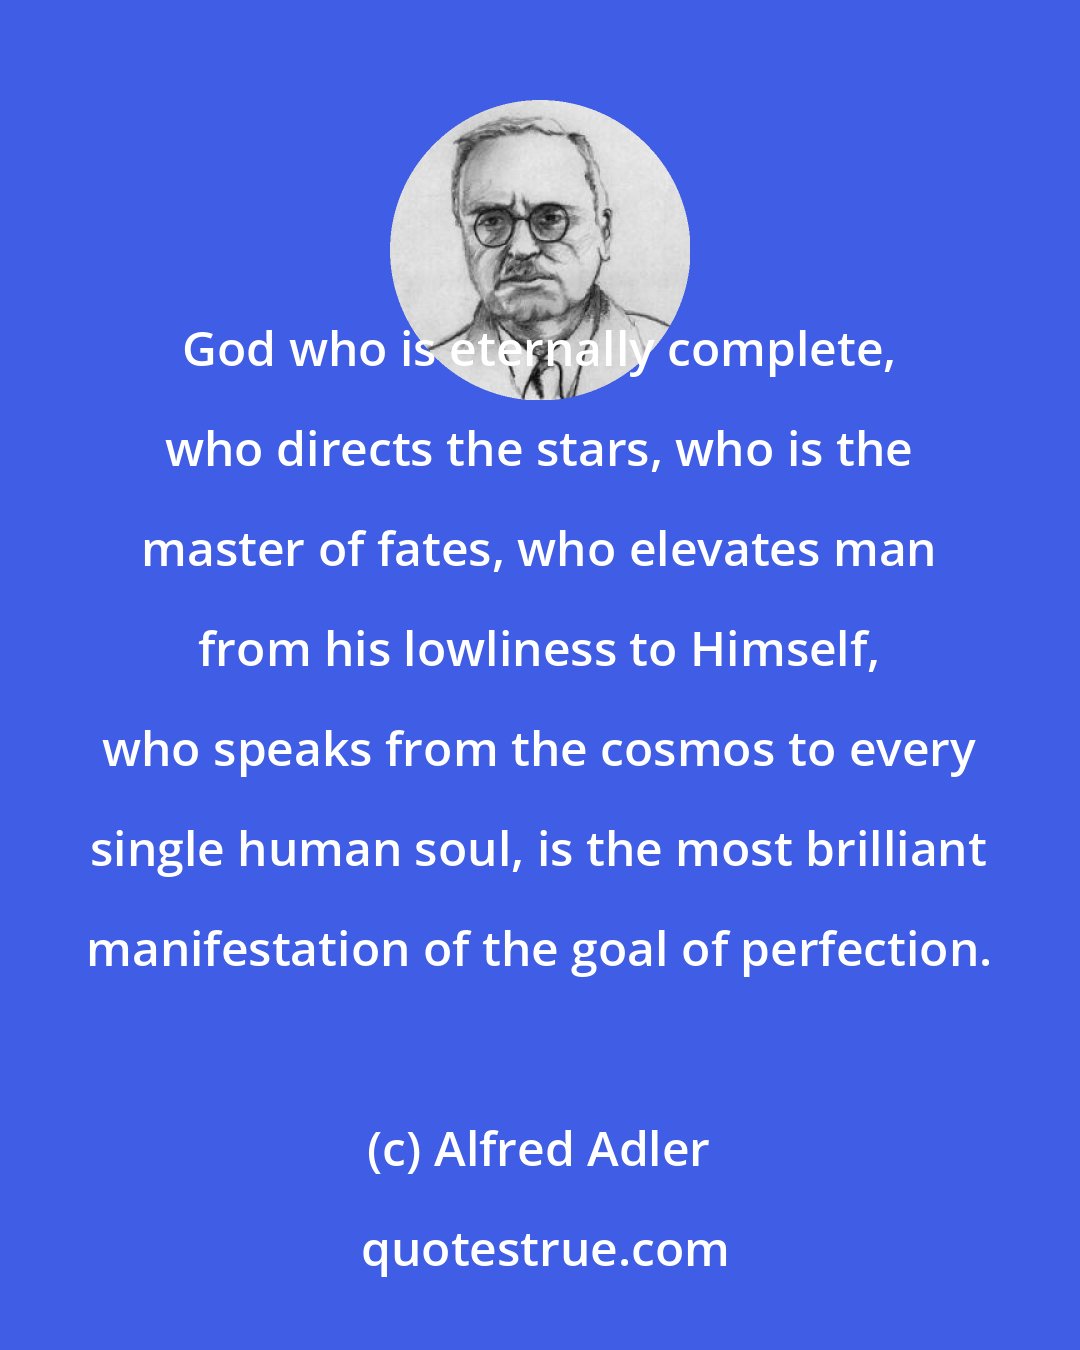 Alfred Adler: God who is eternally complete, who directs the stars, who is the master of fates, who elevates man from his lowliness to Himself, who speaks from the cosmos to every single human soul, is the most brilliant manifestation of the goal of perfection.